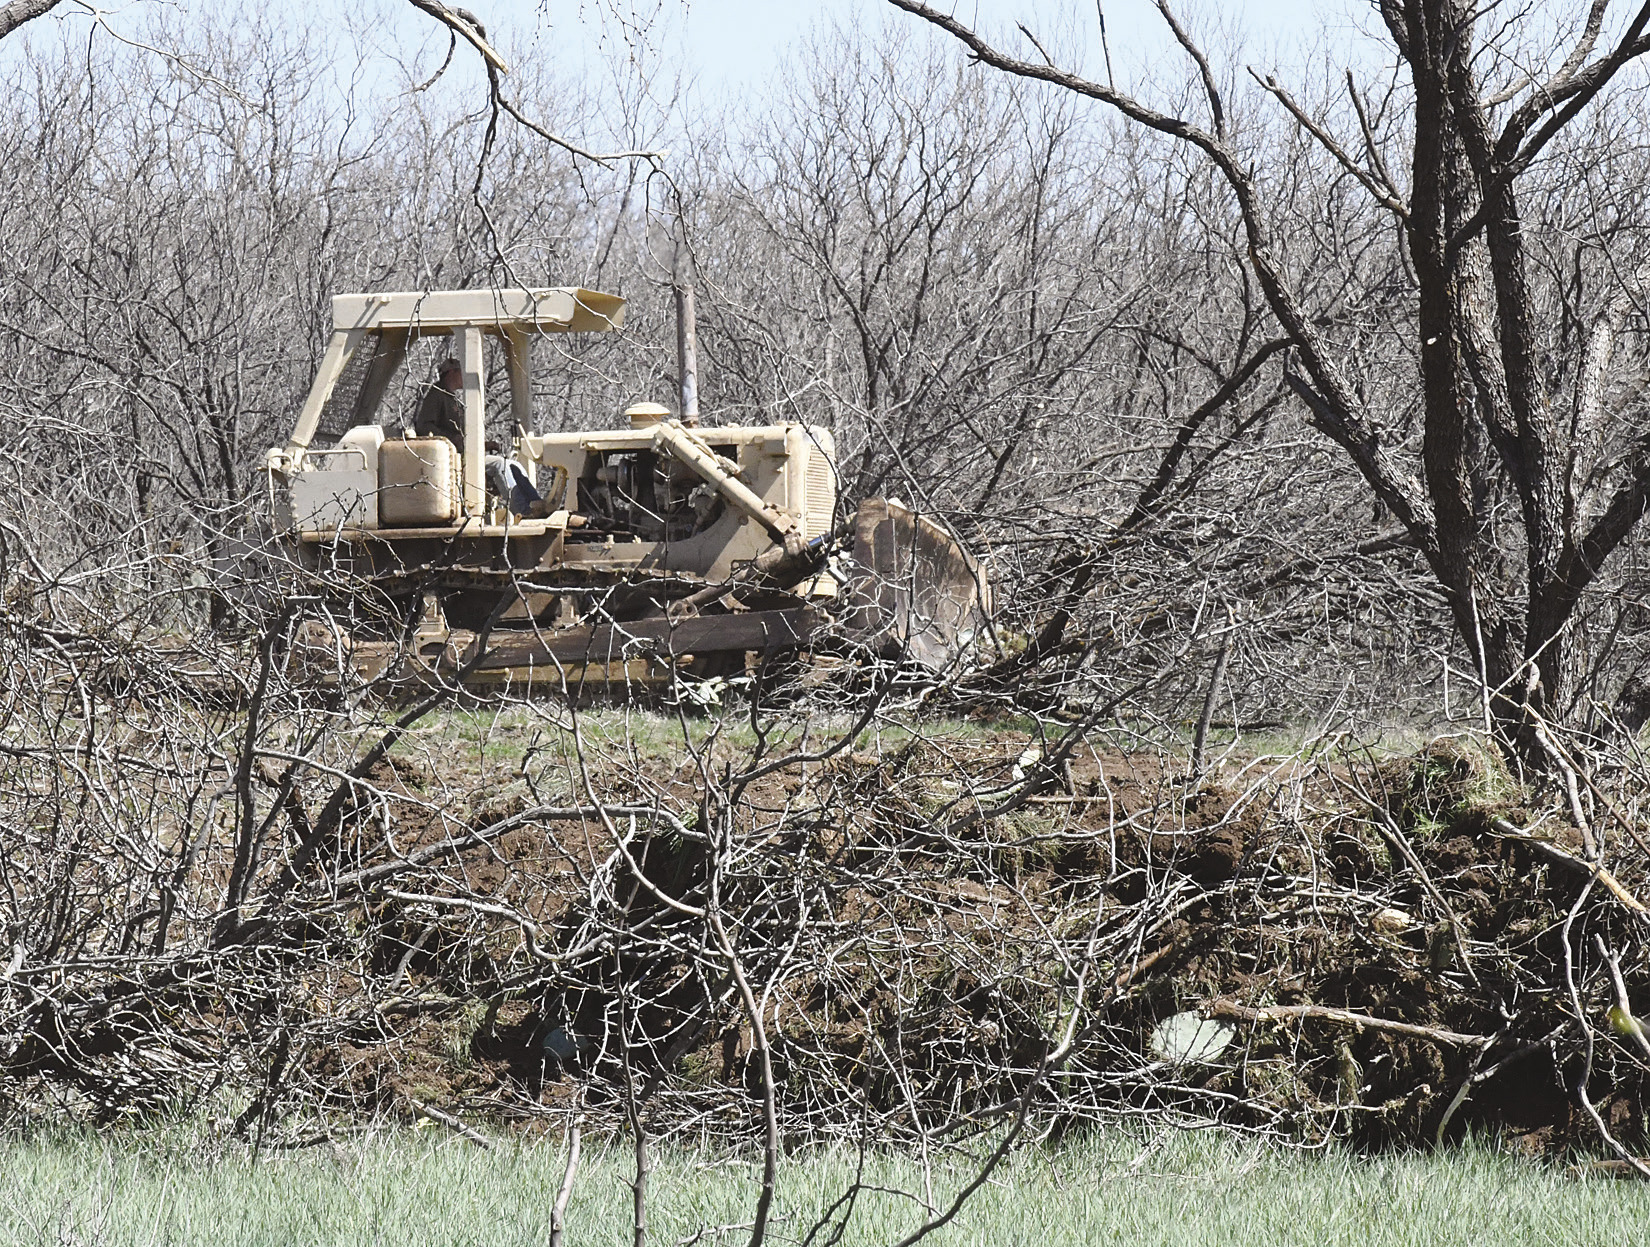 City starts work clearing 42 acres